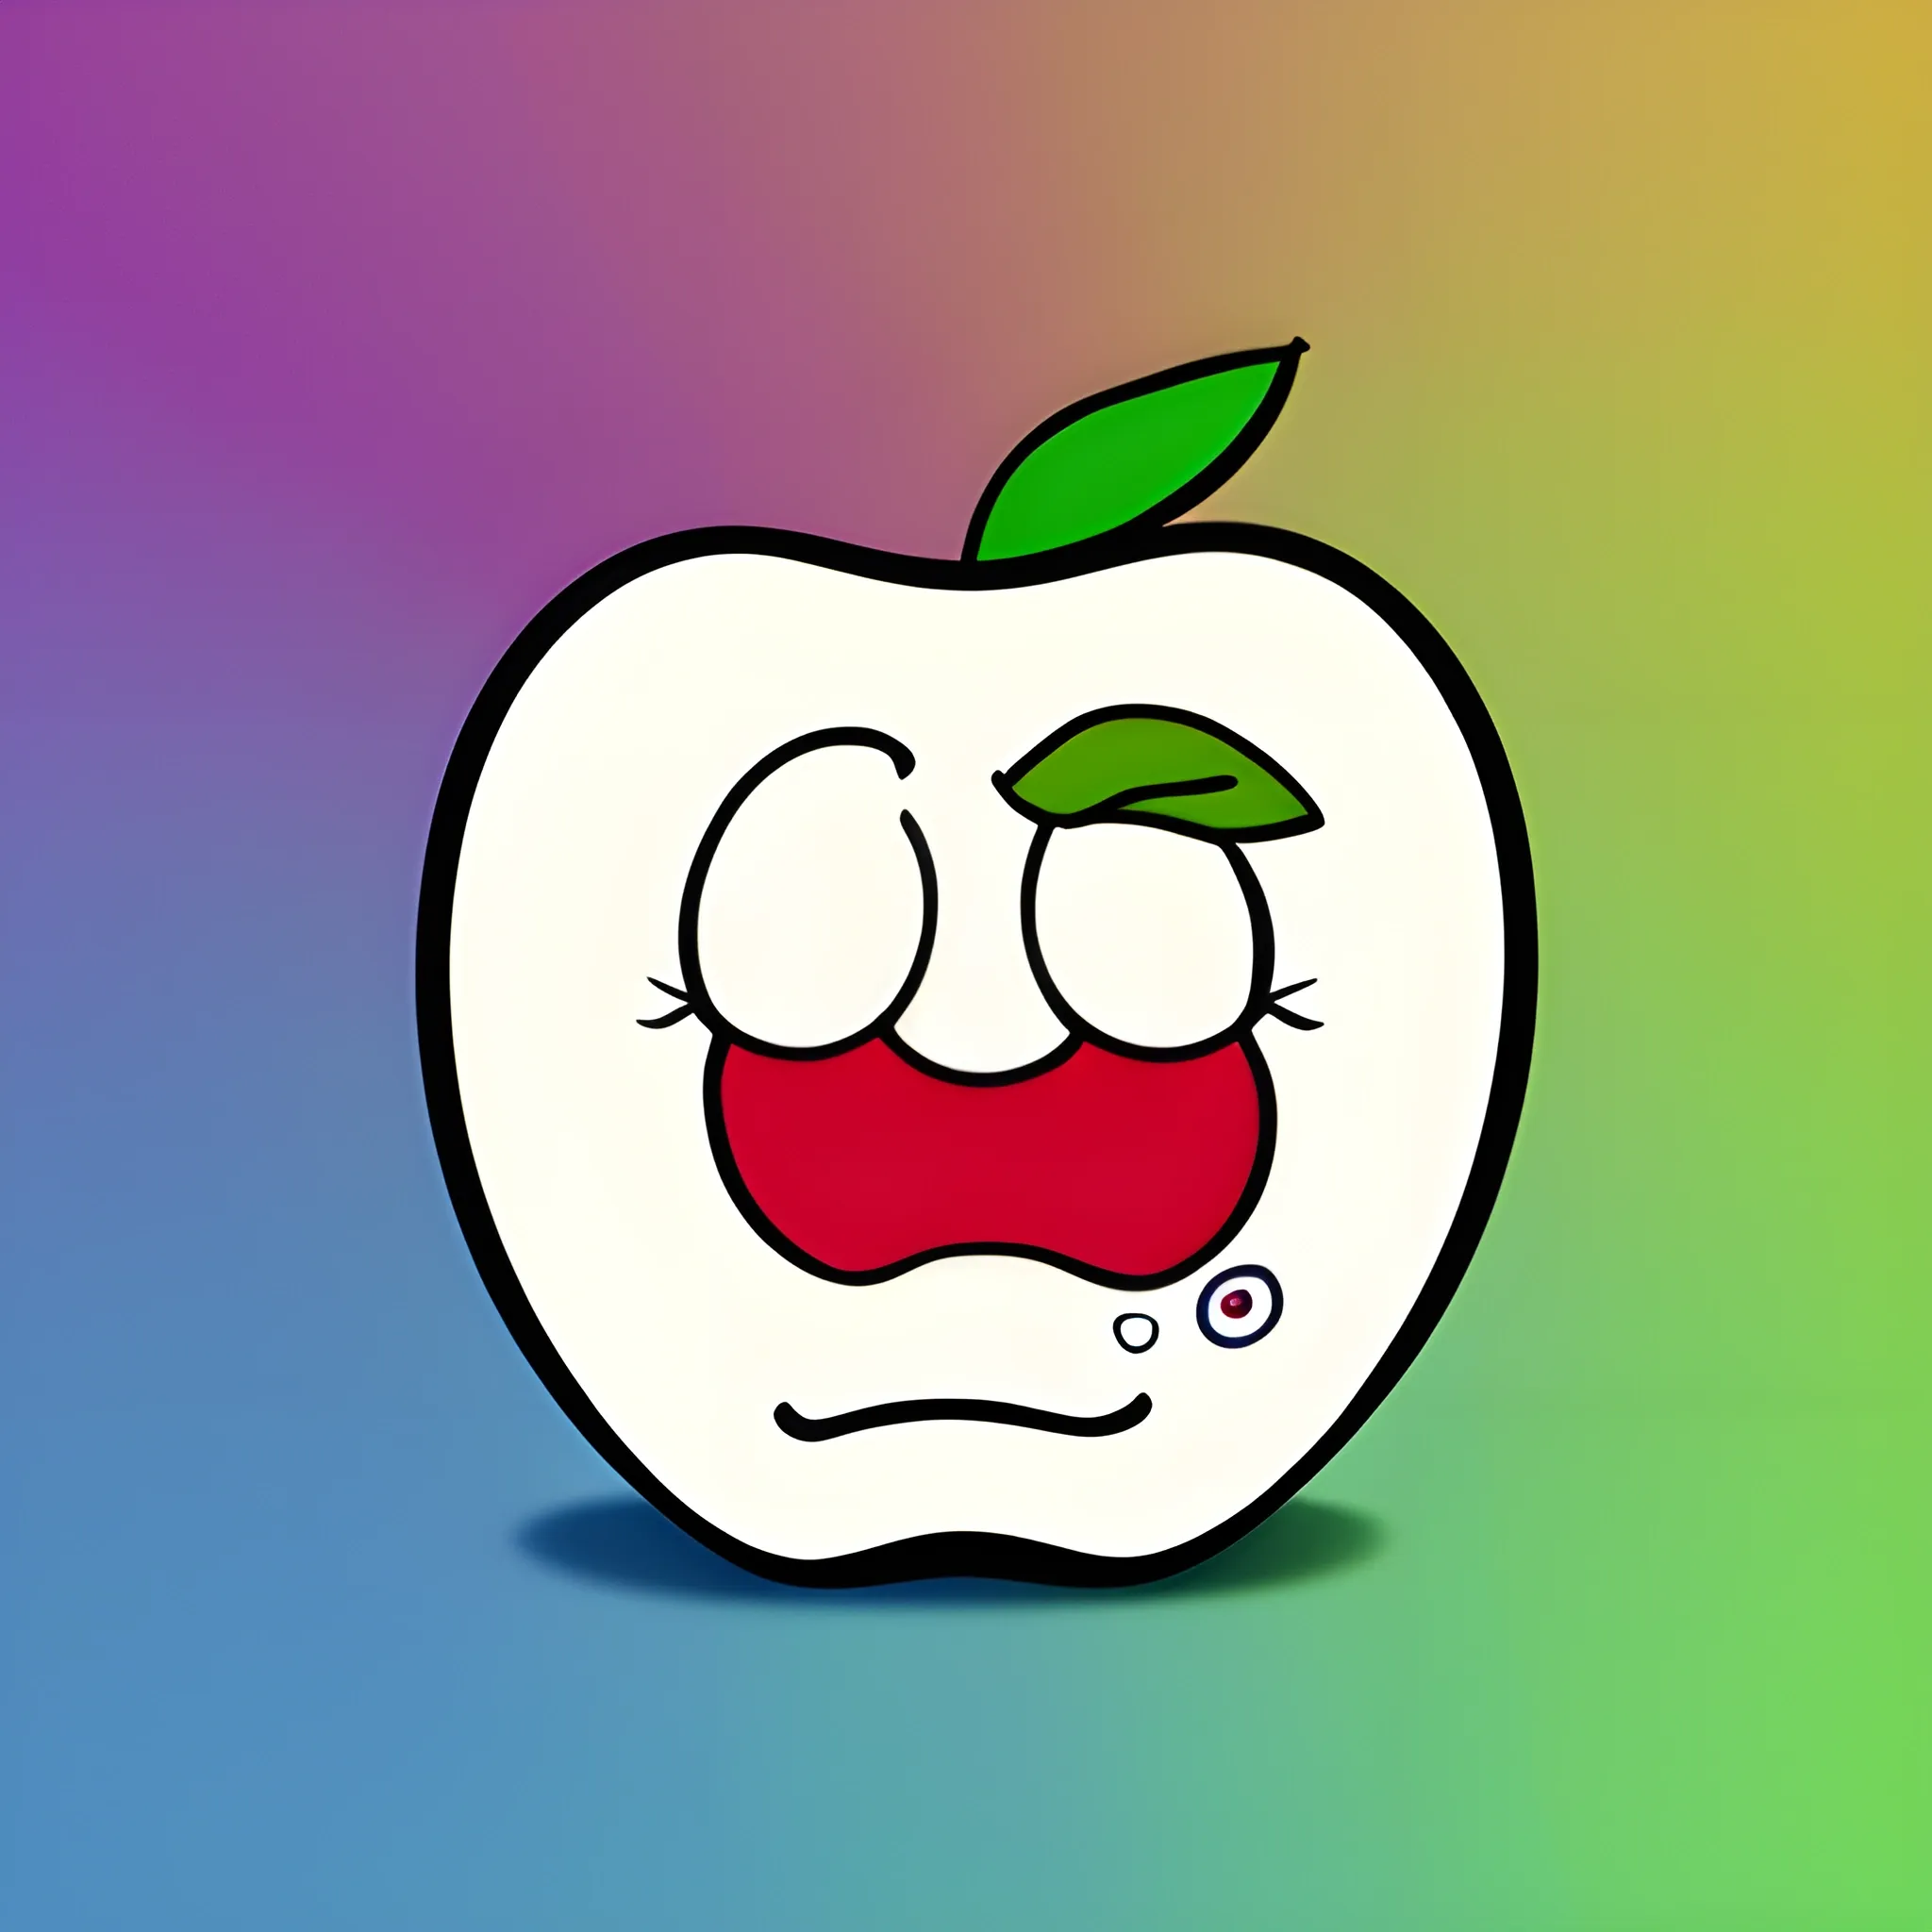 , Cartoon, apple with face crying



